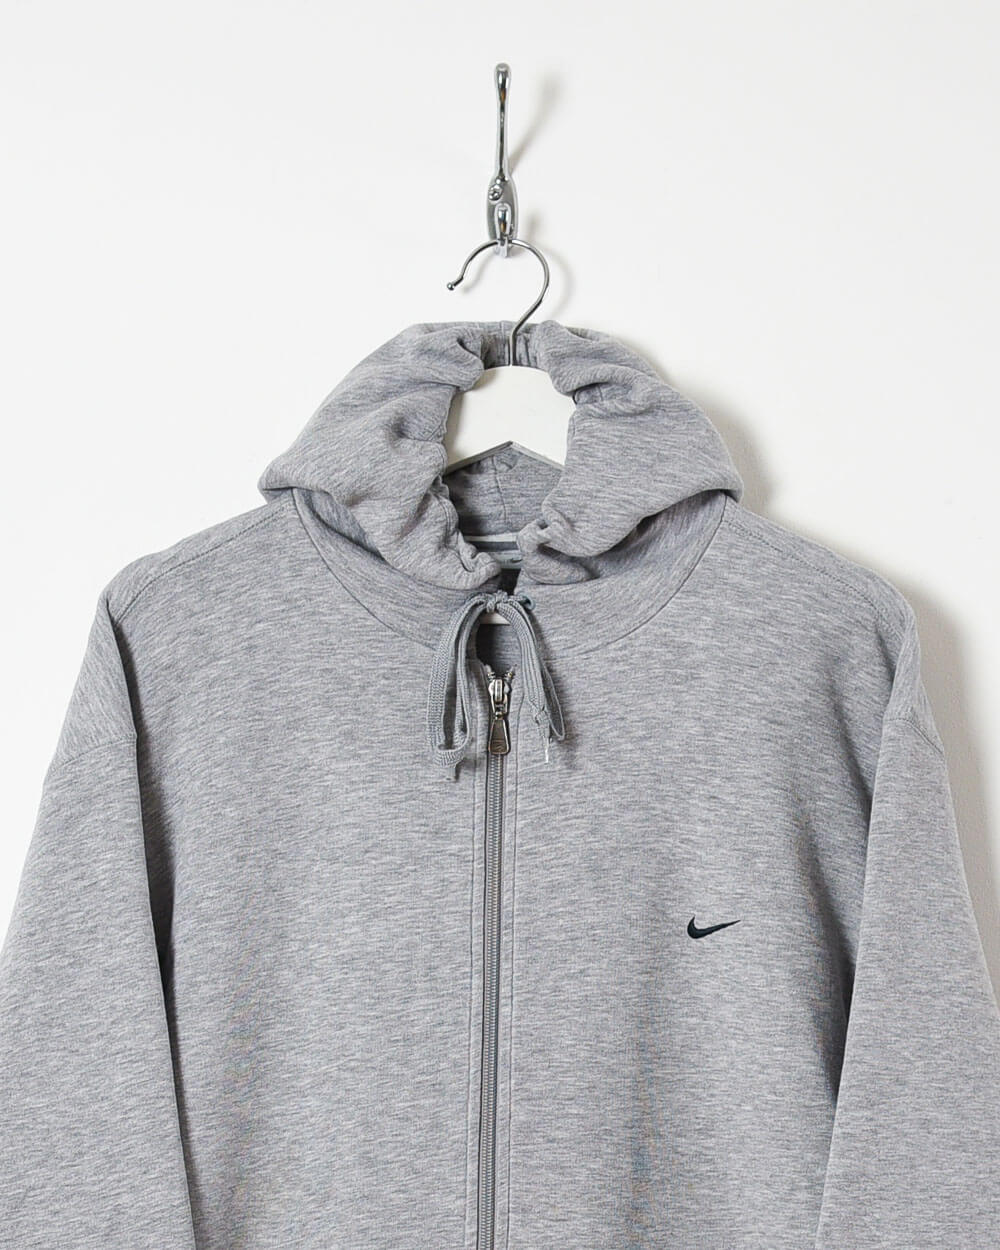 Nike Zip-Through Hoodie - X-Large - Domno Vintage 90s, 80s, 00s Retro and Vintage Clothing 